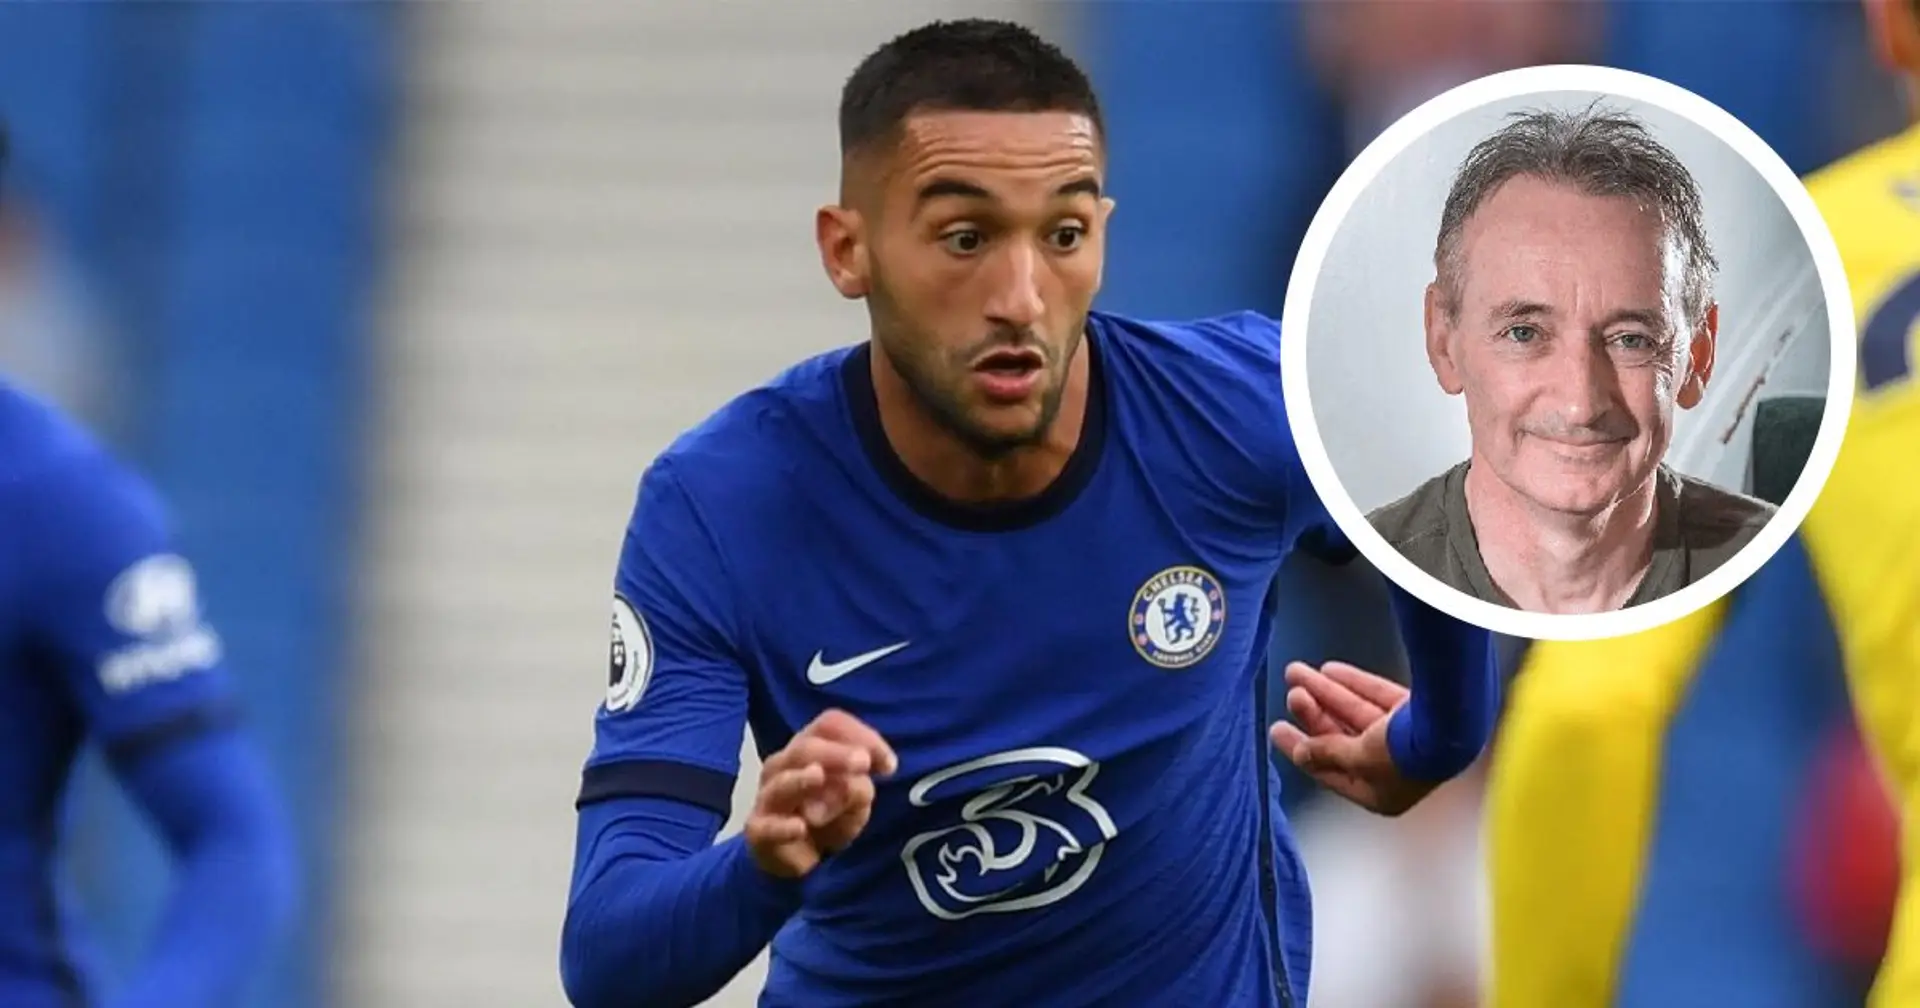 'He's even better than I thought he was!': Pat Nevin names 3 brilliant qualities Ziyech brings to Chelsea 